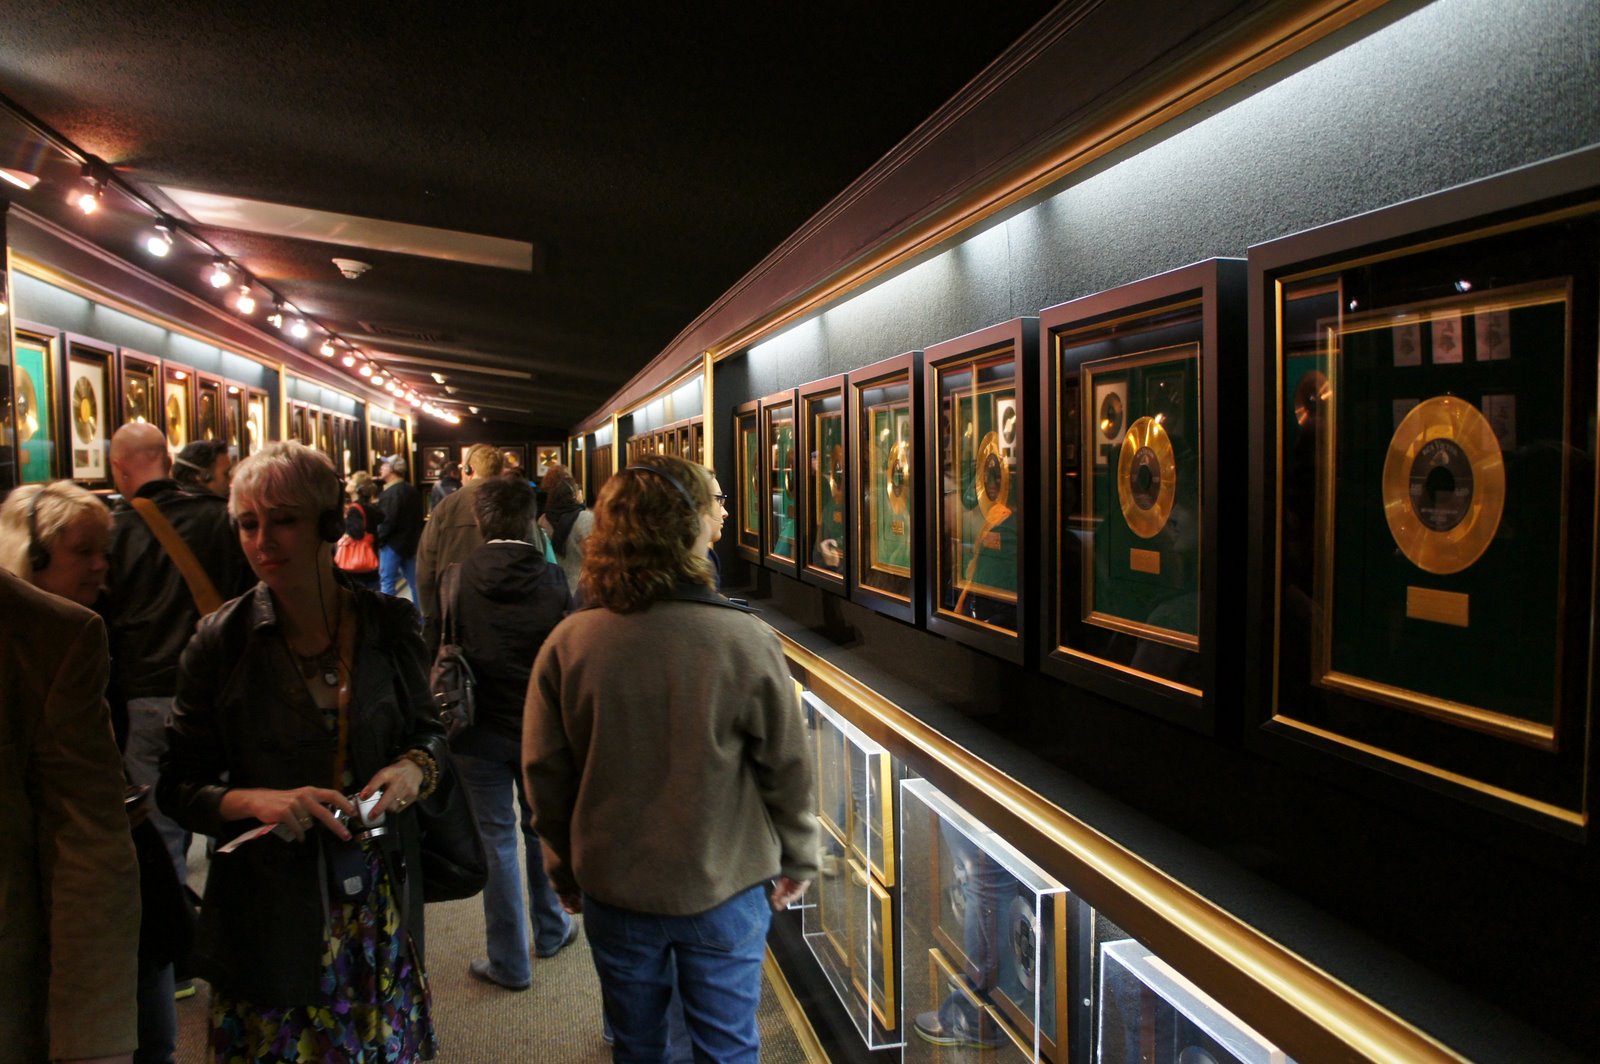 Home of the Hodgi: Inside Graceland, and the Elvis-mobiles